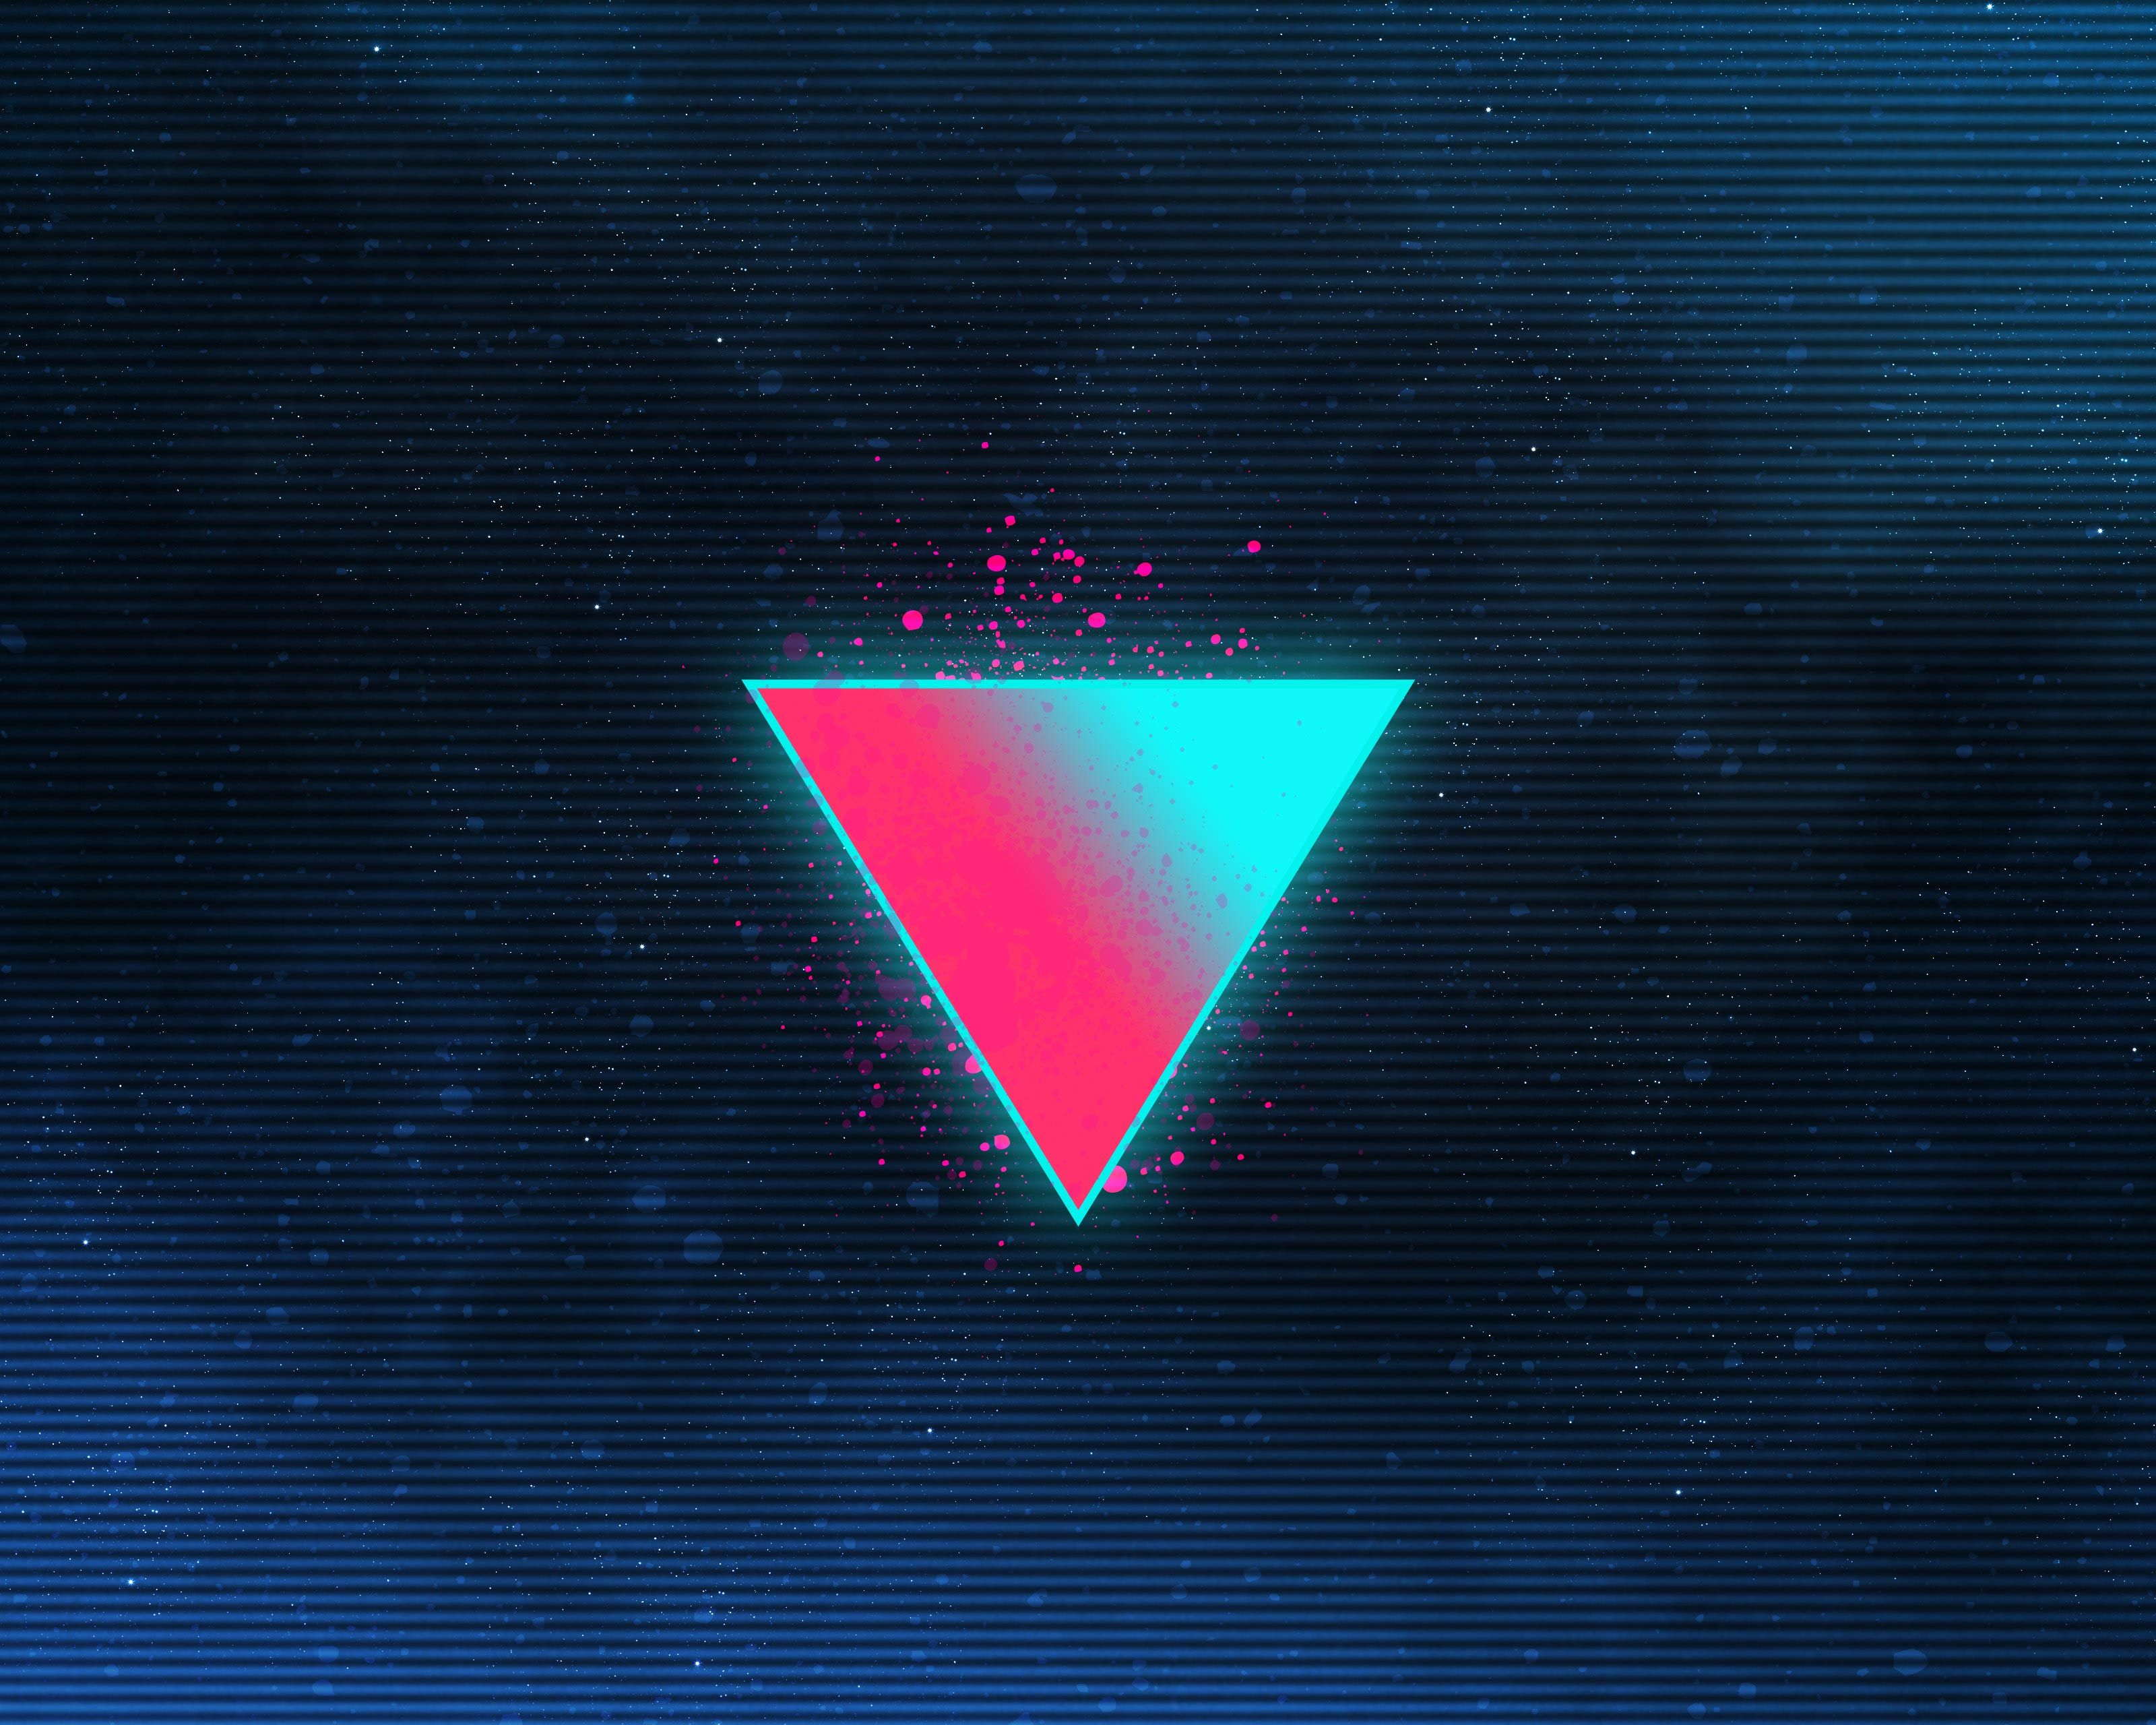 80s theme wallpaper,triangle,space,sky,font,technology